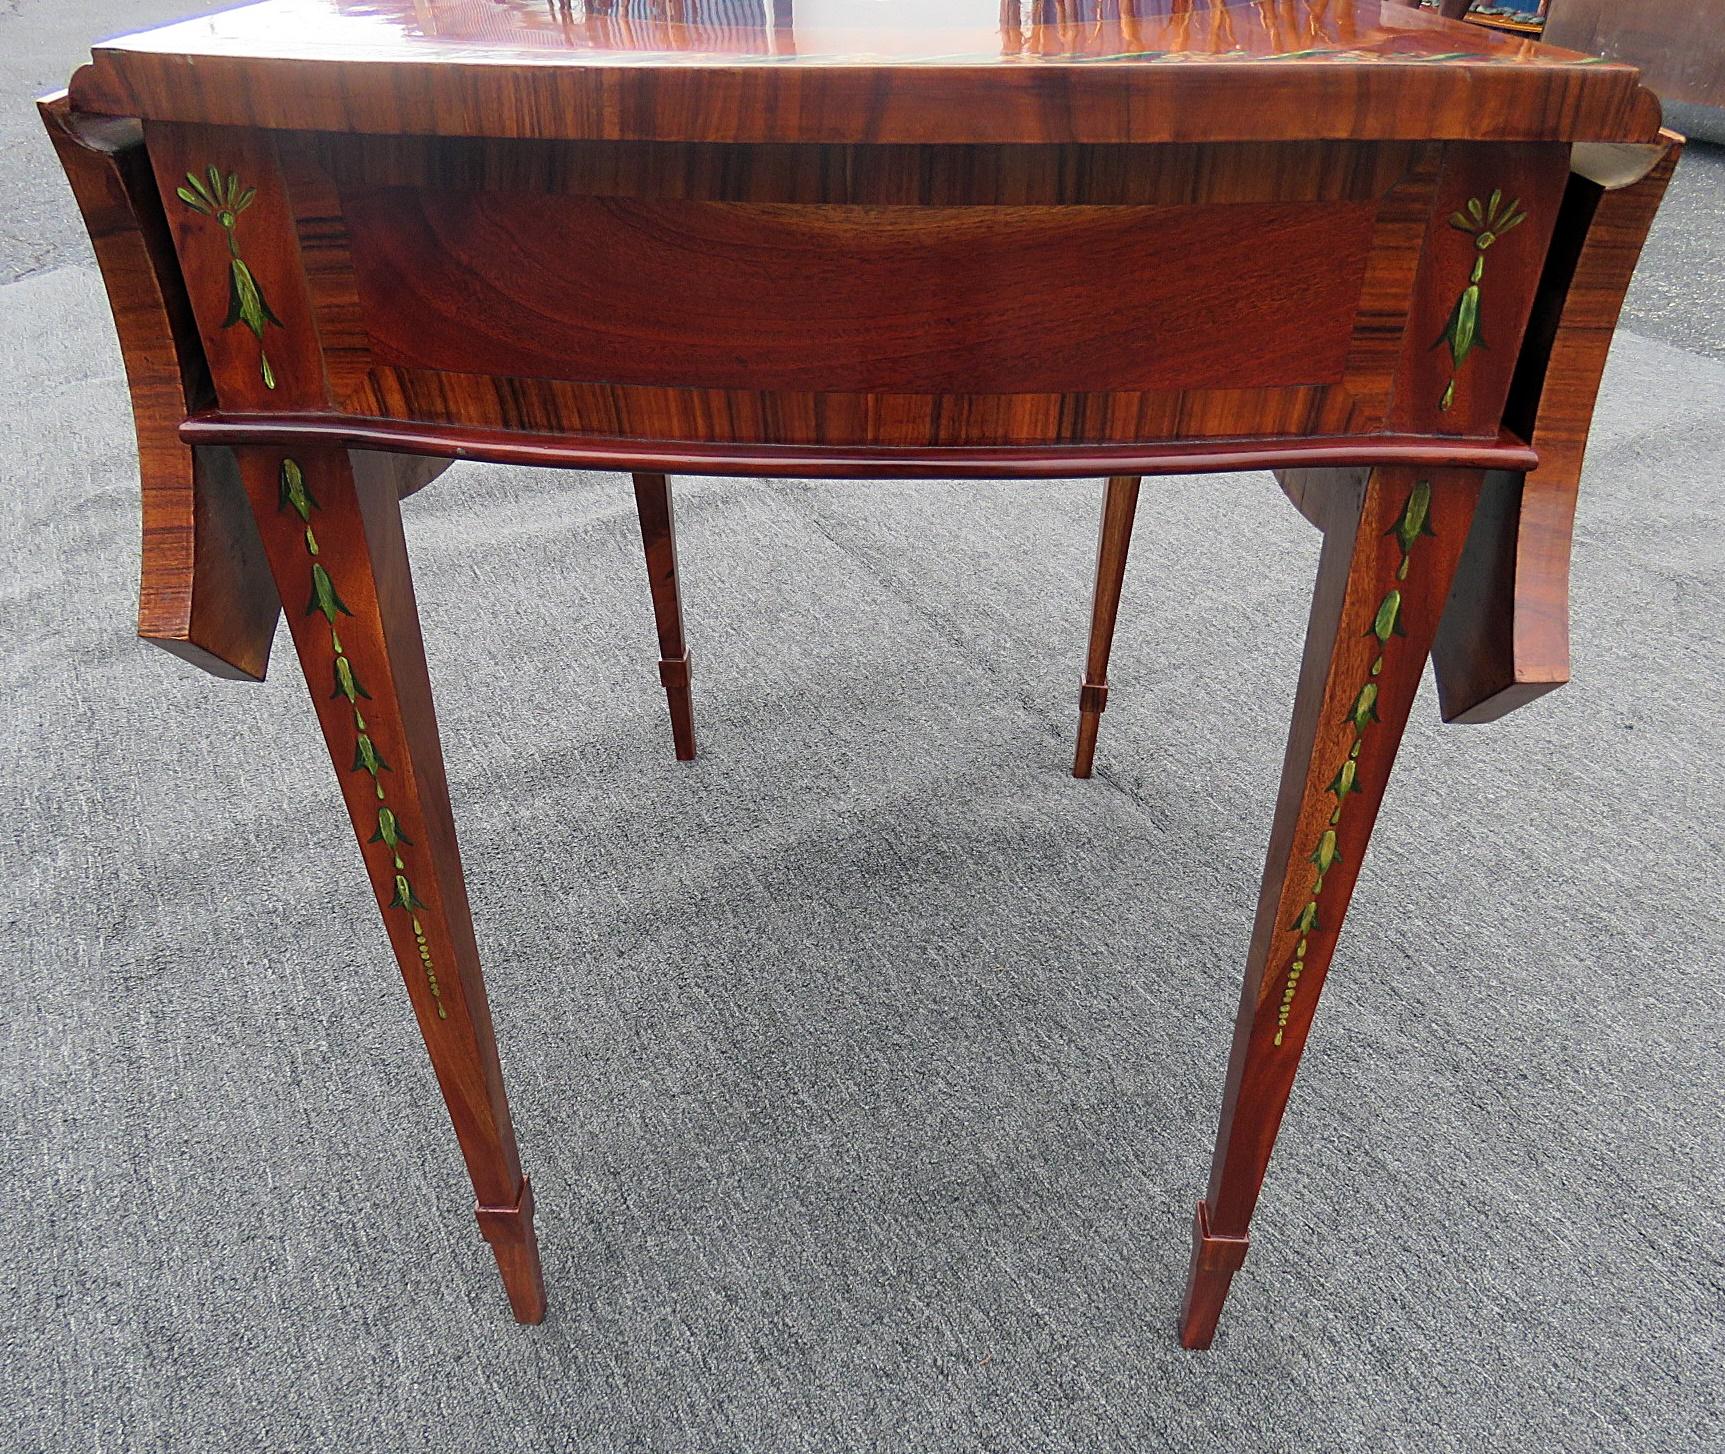 Wood Antique English Paint Decorated Adam's Style Pembroke Table